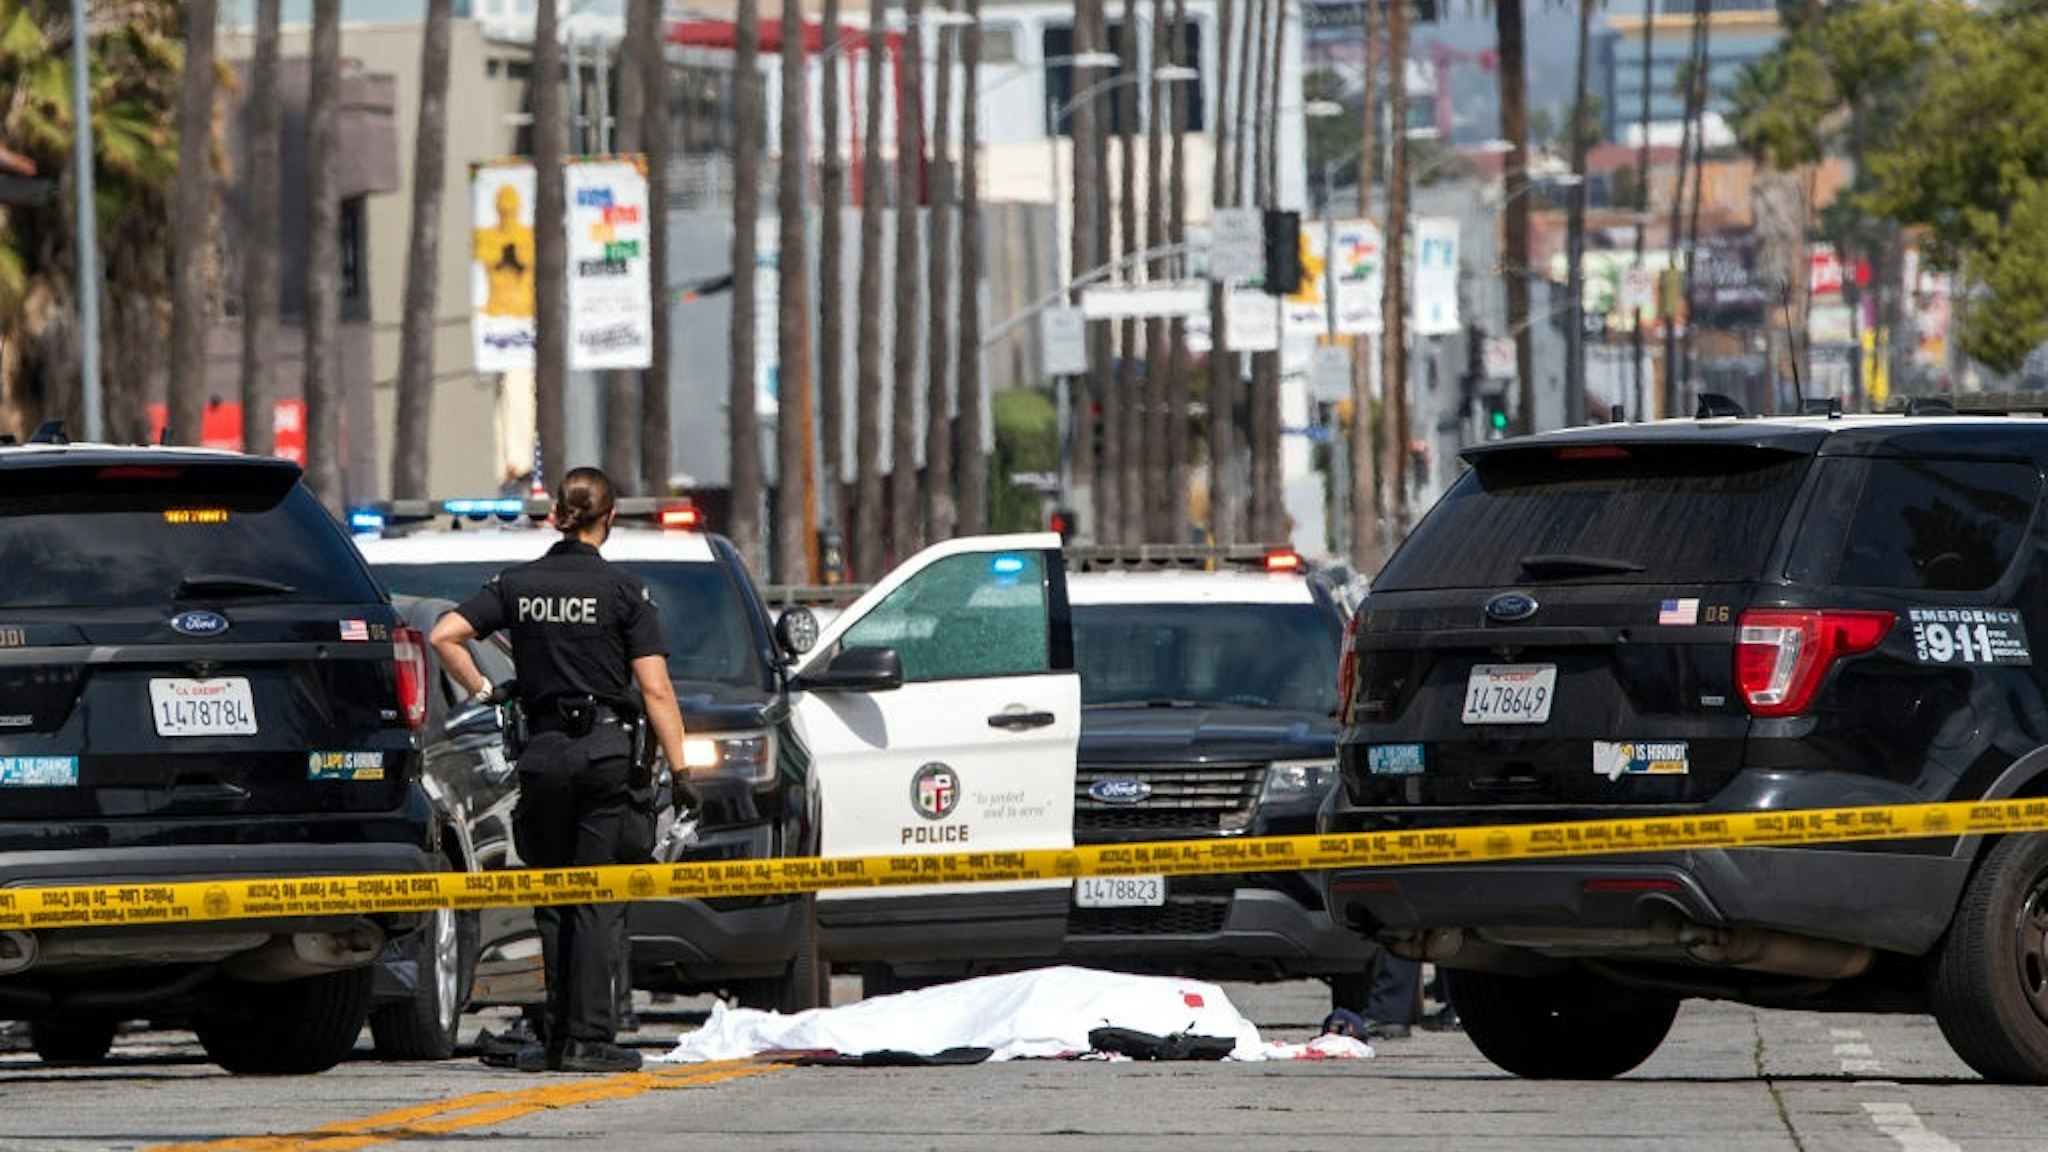 A LAPD police officer stands at the corner of Fairfax Avenue and Sunset Boulevard where a body covered in a white sheet lies on the pavement in Los Angeles on April 24, 2021 in what appears to be an officer-involved shooting.